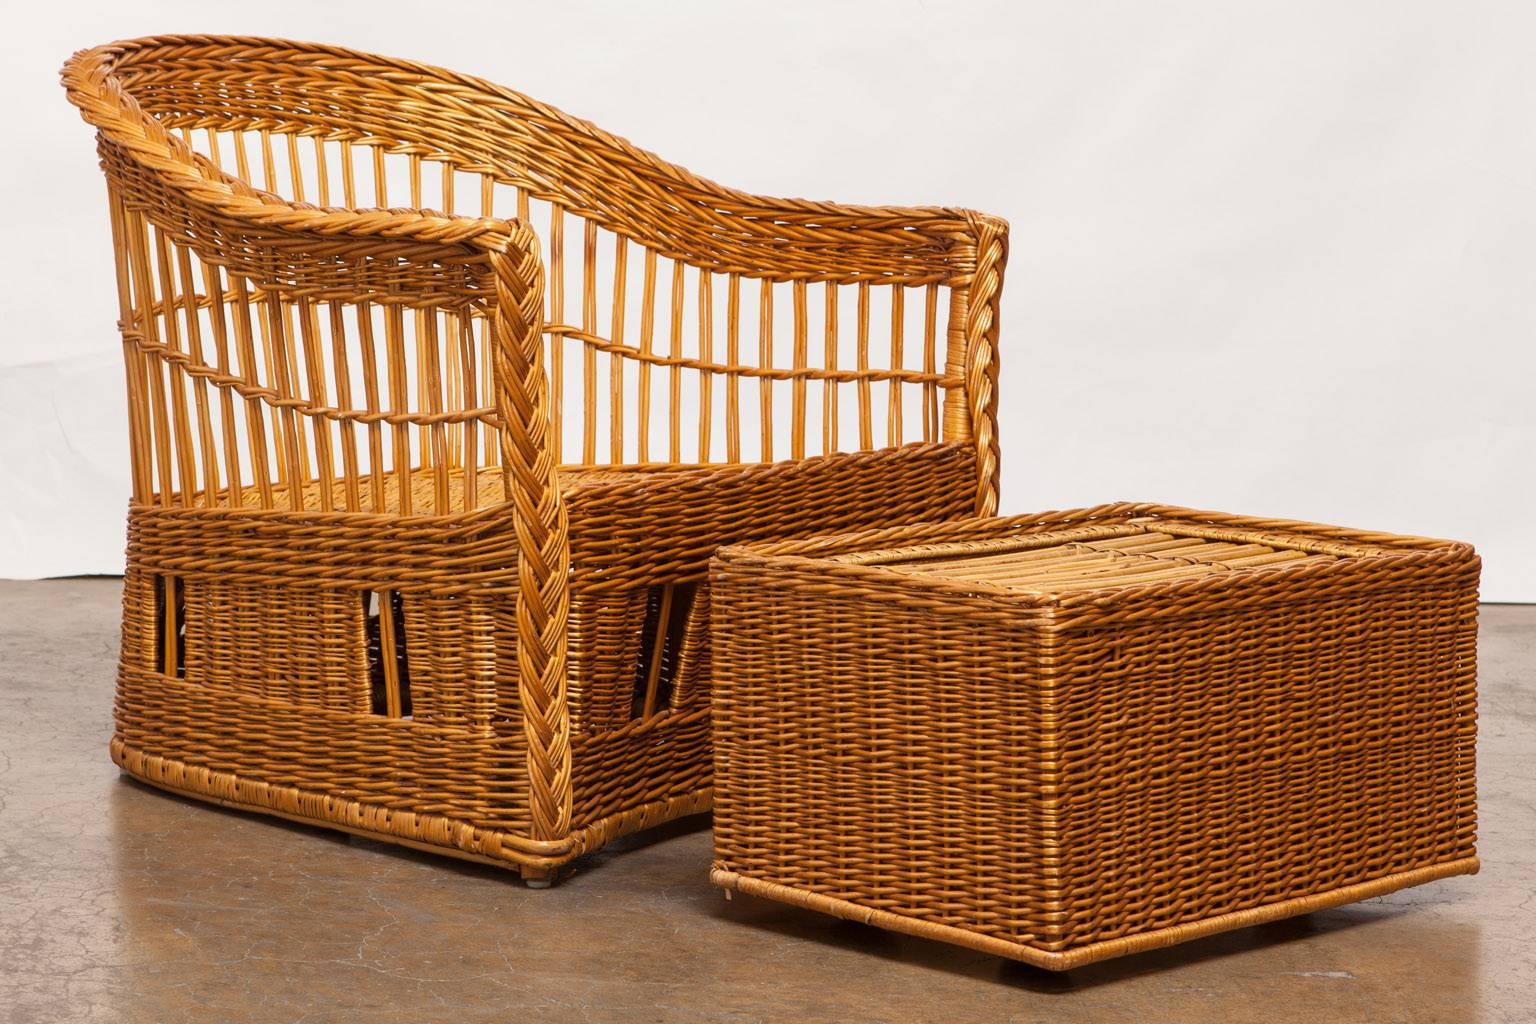 Stylish pair of rattan and stick wicker club chairs or lounge chairs and ottoman by Mcguire featuring a barrel-back form. The wicker covered frames have braided arms and decorative windows in the bases. Well-made with a lovely profile these chairs